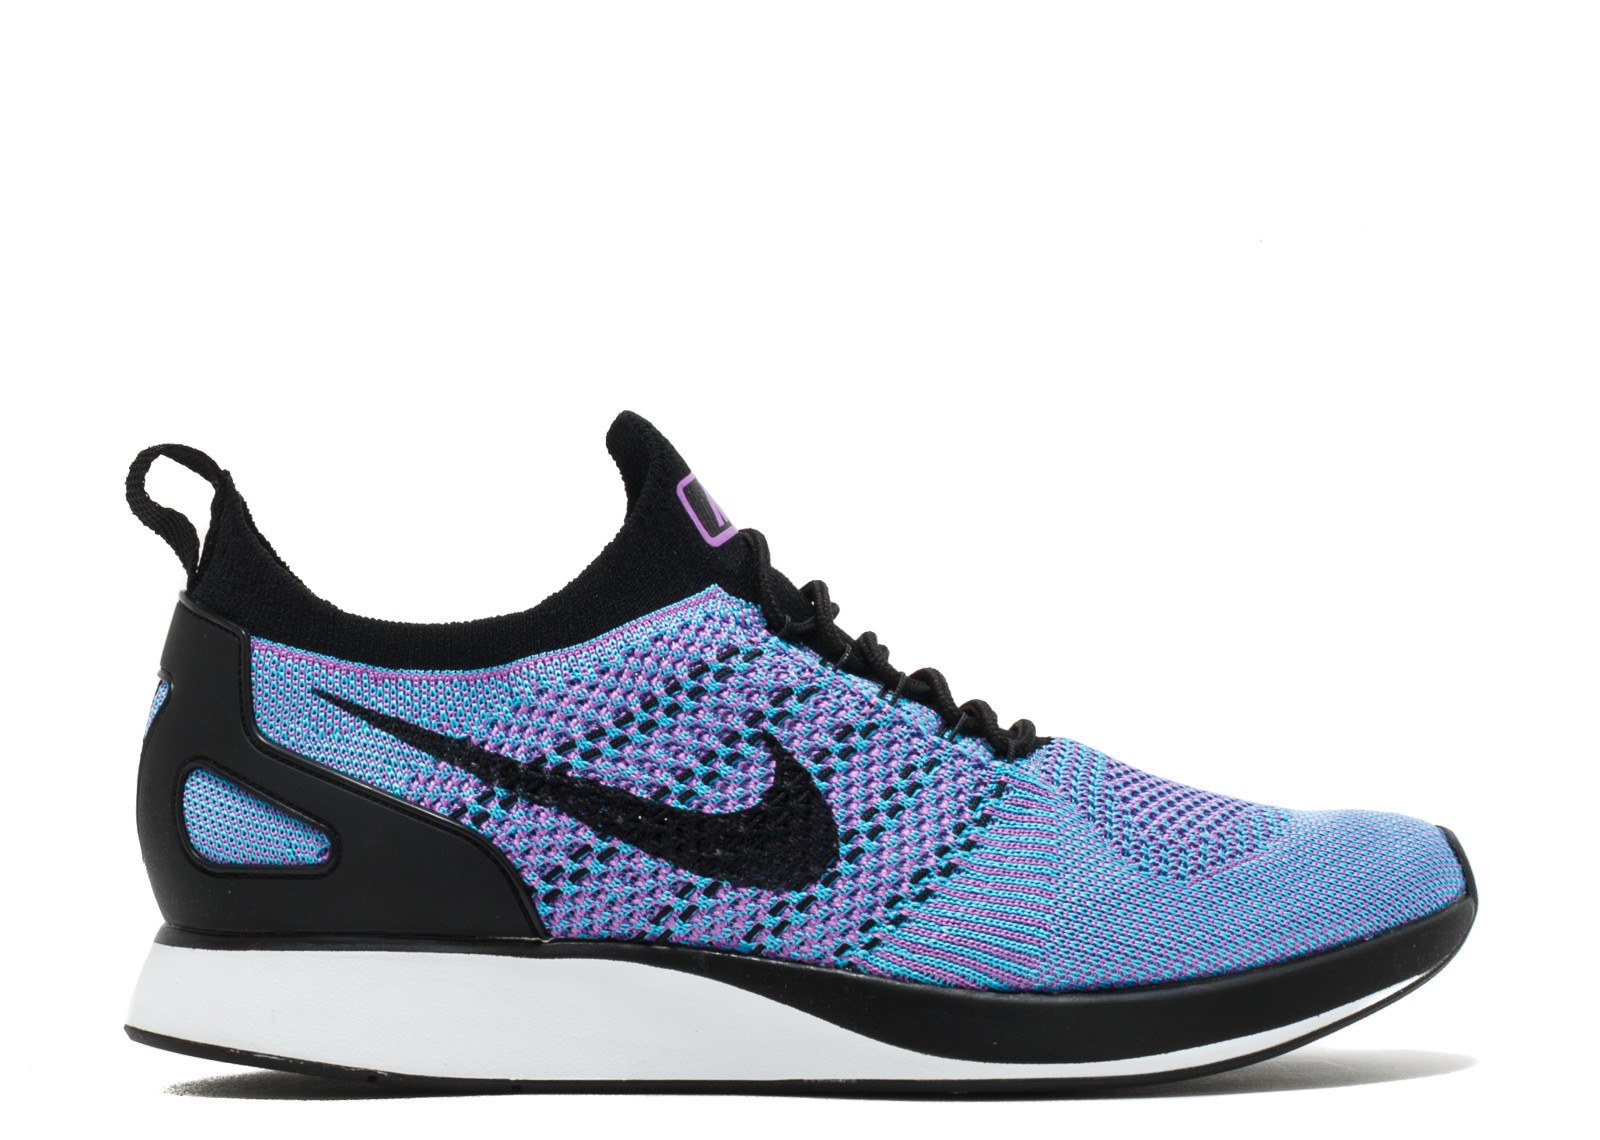 Nike Lab Dunk Lux Low Urban Haze Sneakers Shoes 857587-300 - Air Zoom Mariah Flyknit Racer Blue Bright Violet White Chlorine - 500 -